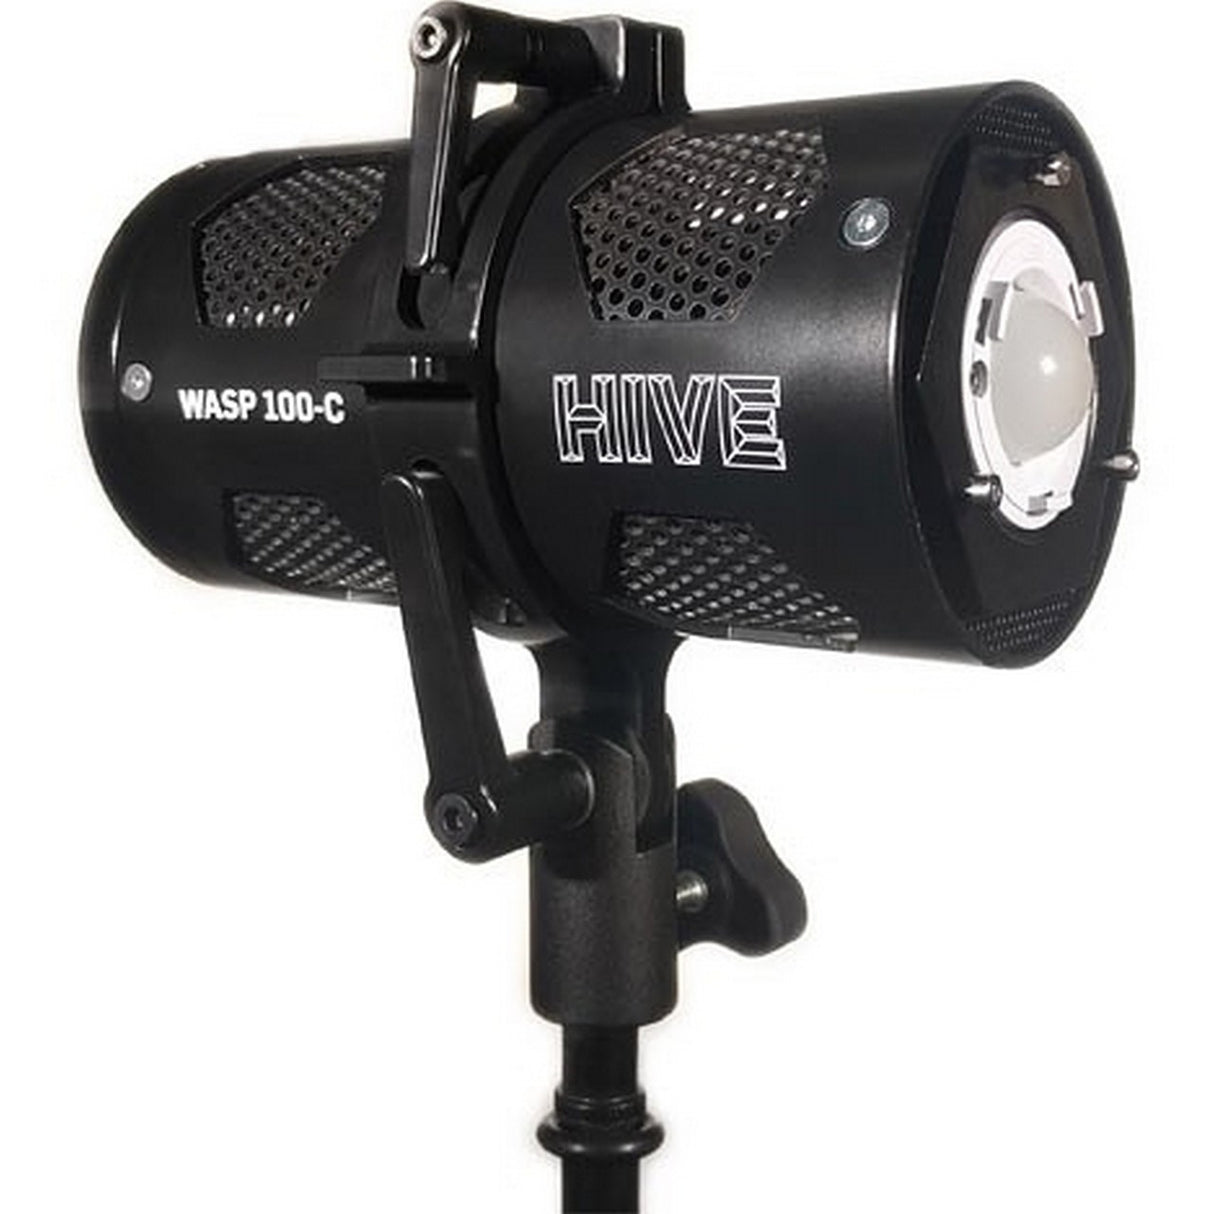 Hive Lighting WLS1C-OF | Wasp 100-C Open Face LED Light, No Reflector